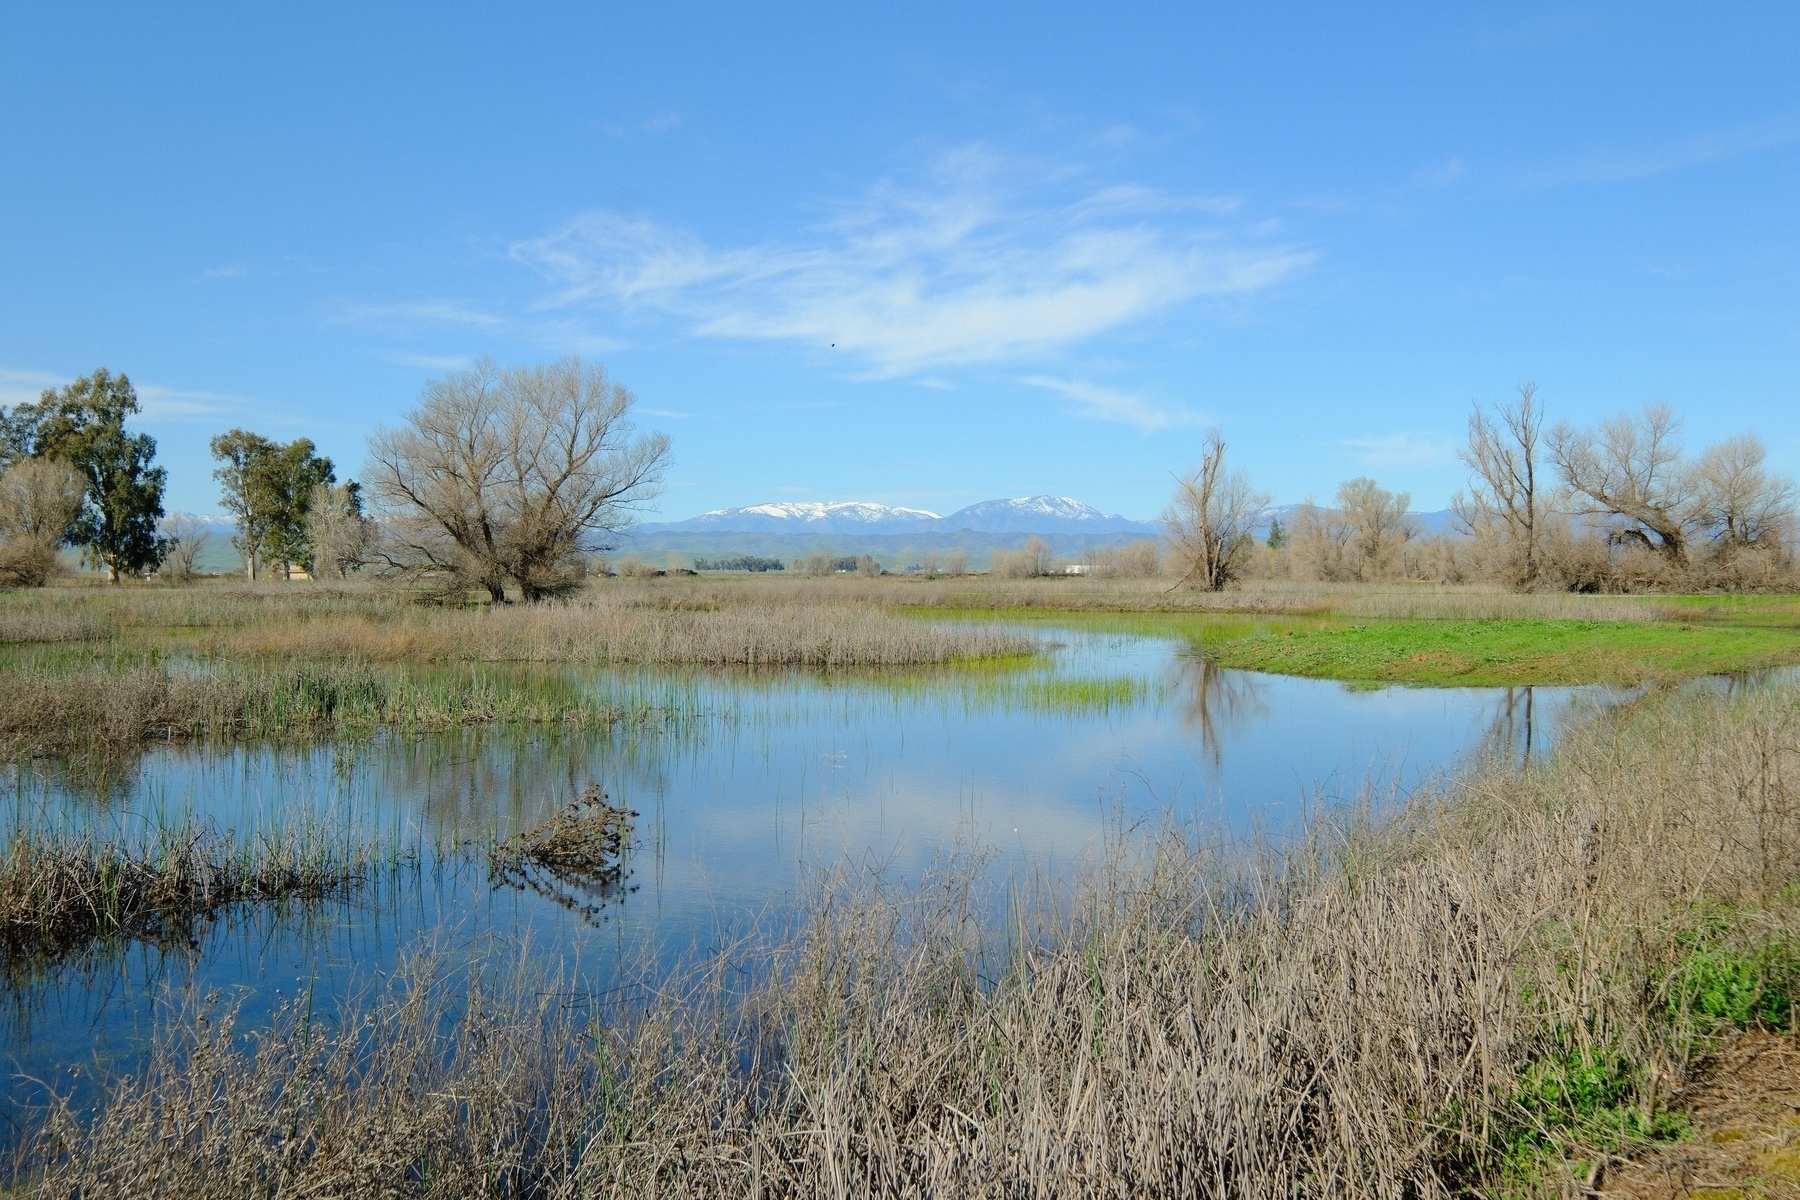 Slightly reflective pond surrounded by grasses and bare trees with snow-capped mountains in the background under a blue sky with wispy clouds.